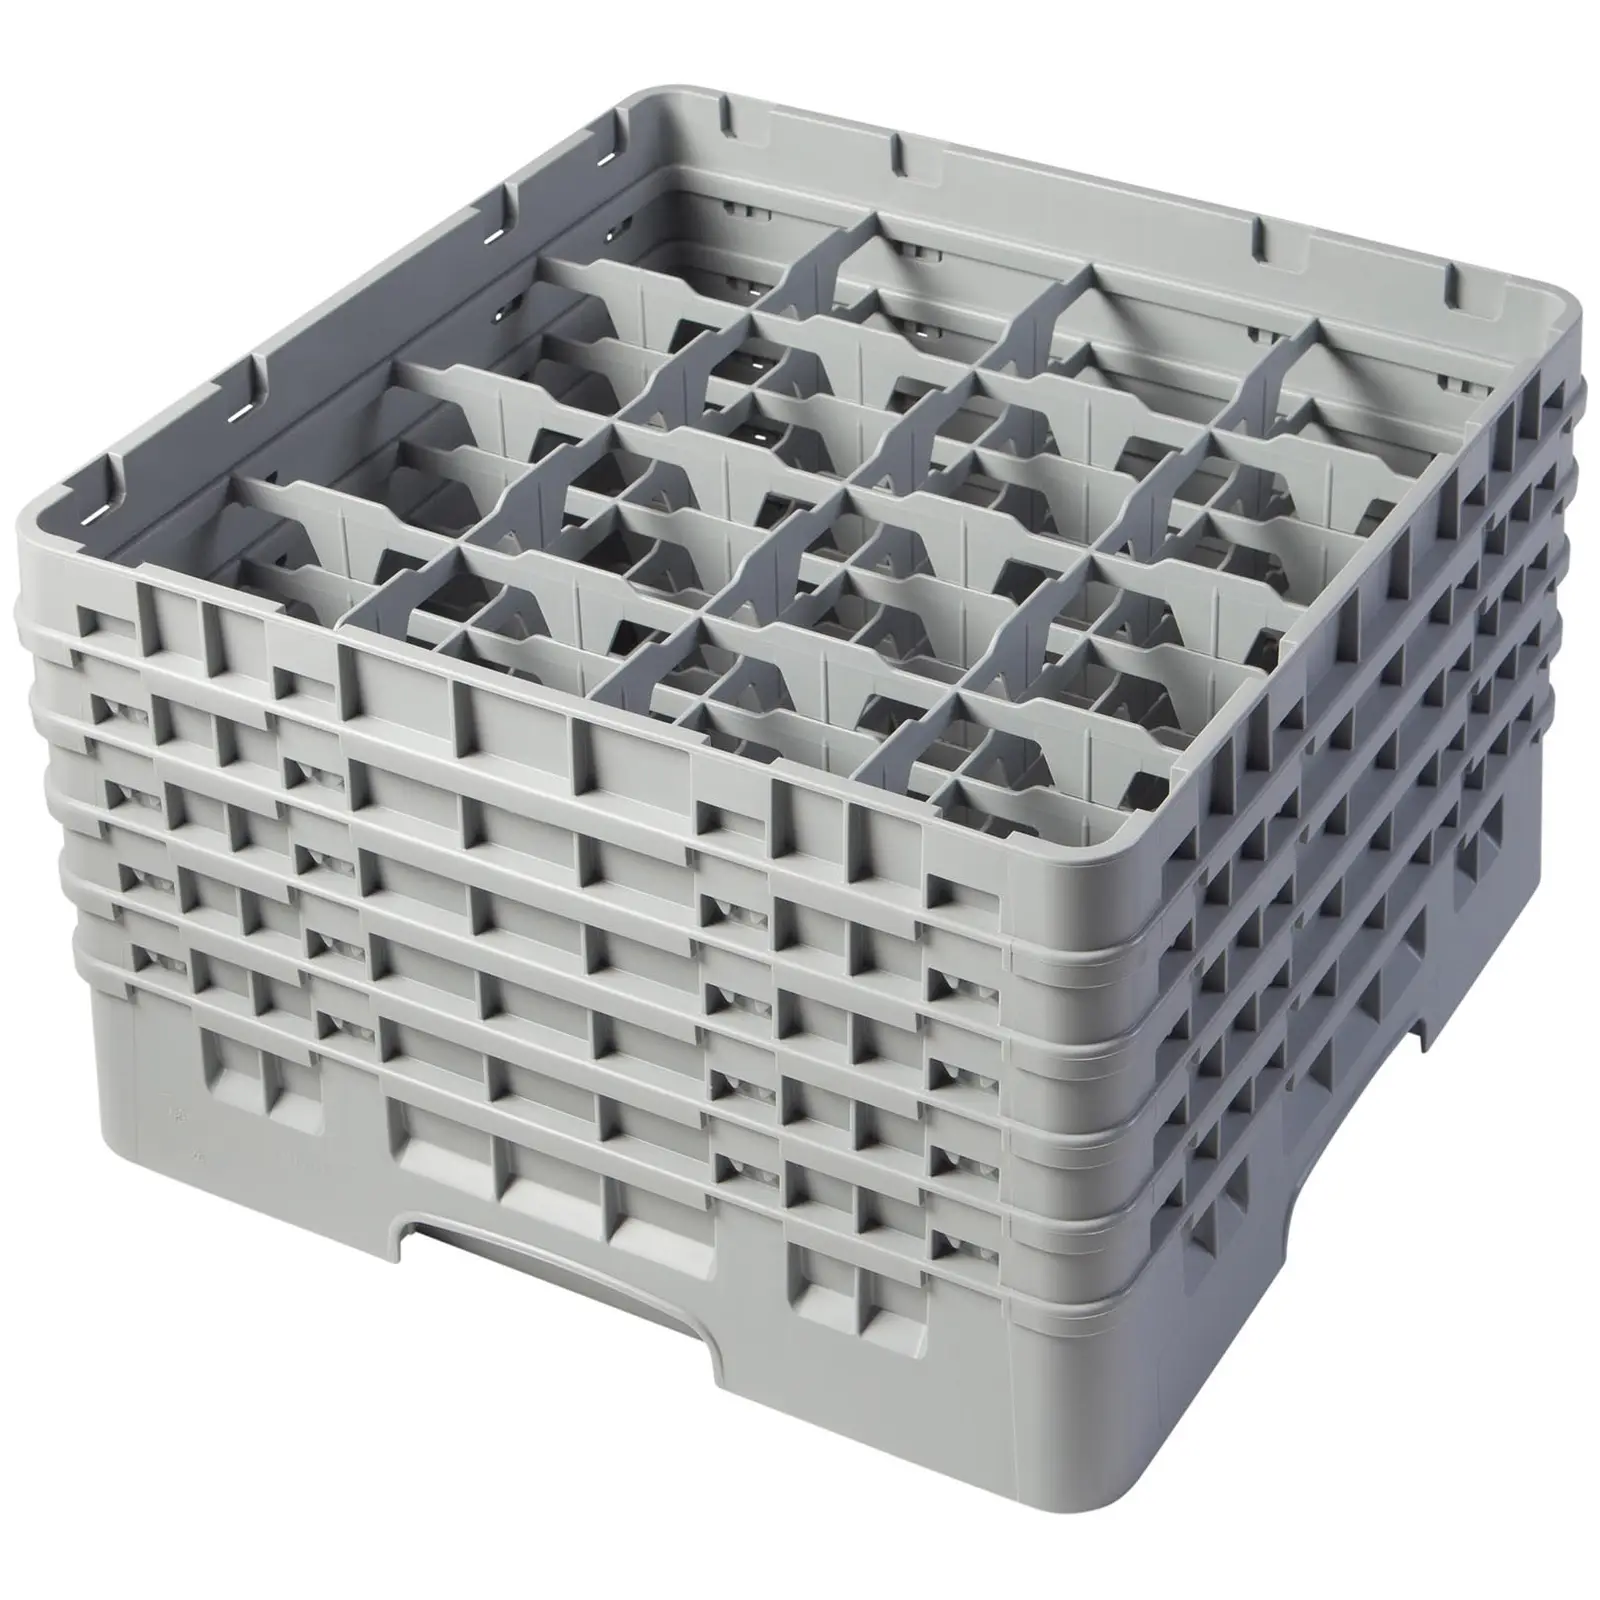 Glass Rack - 16 compartments - 50 x 50 x 30,8 cm - glass height: 25,7 cm